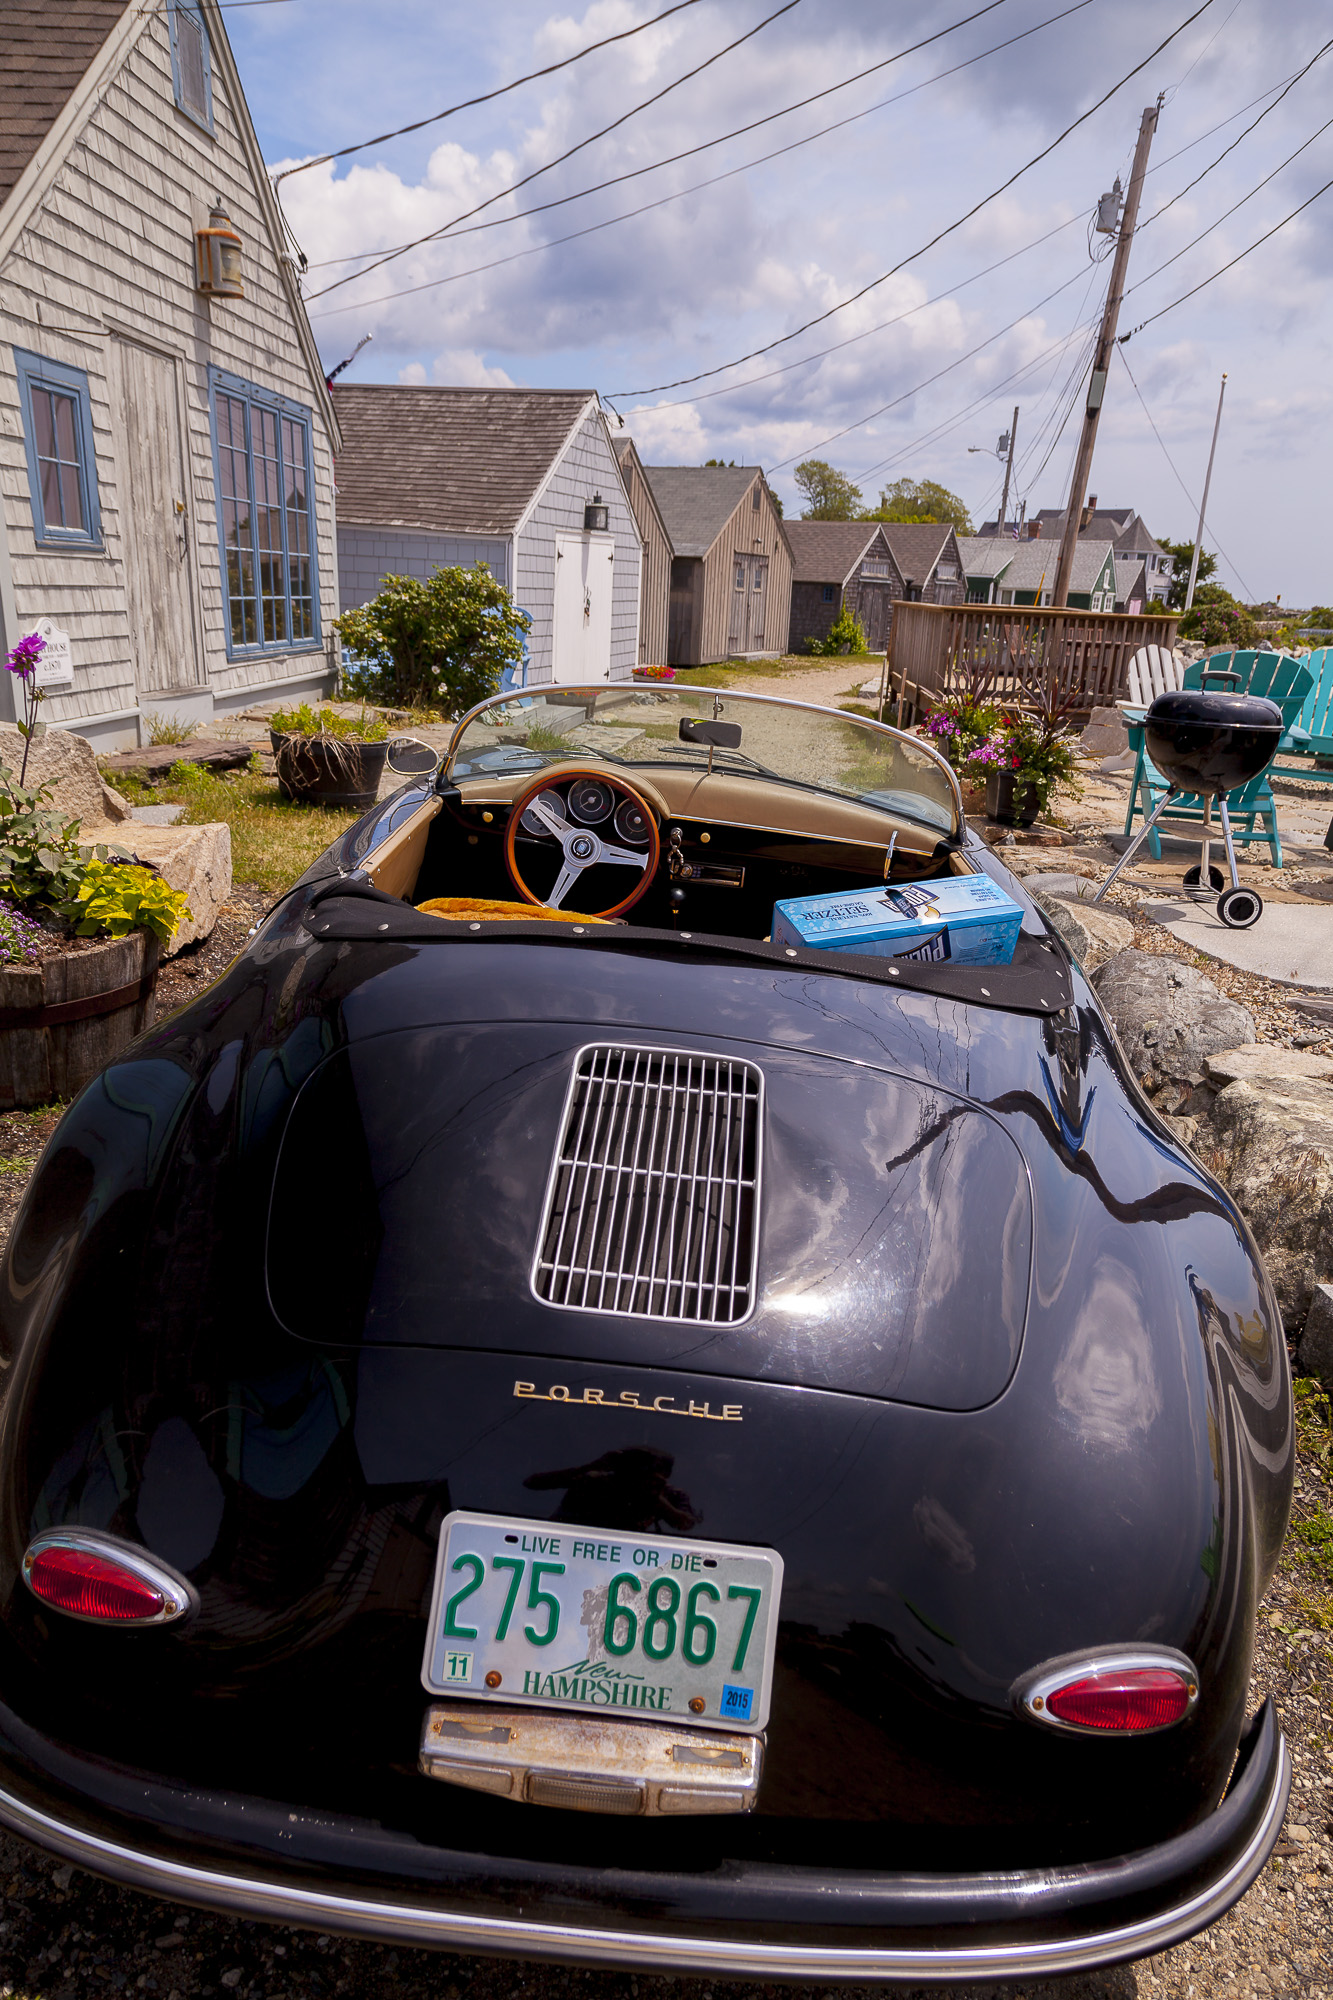 Seaside Porsche from USA New Hampshire